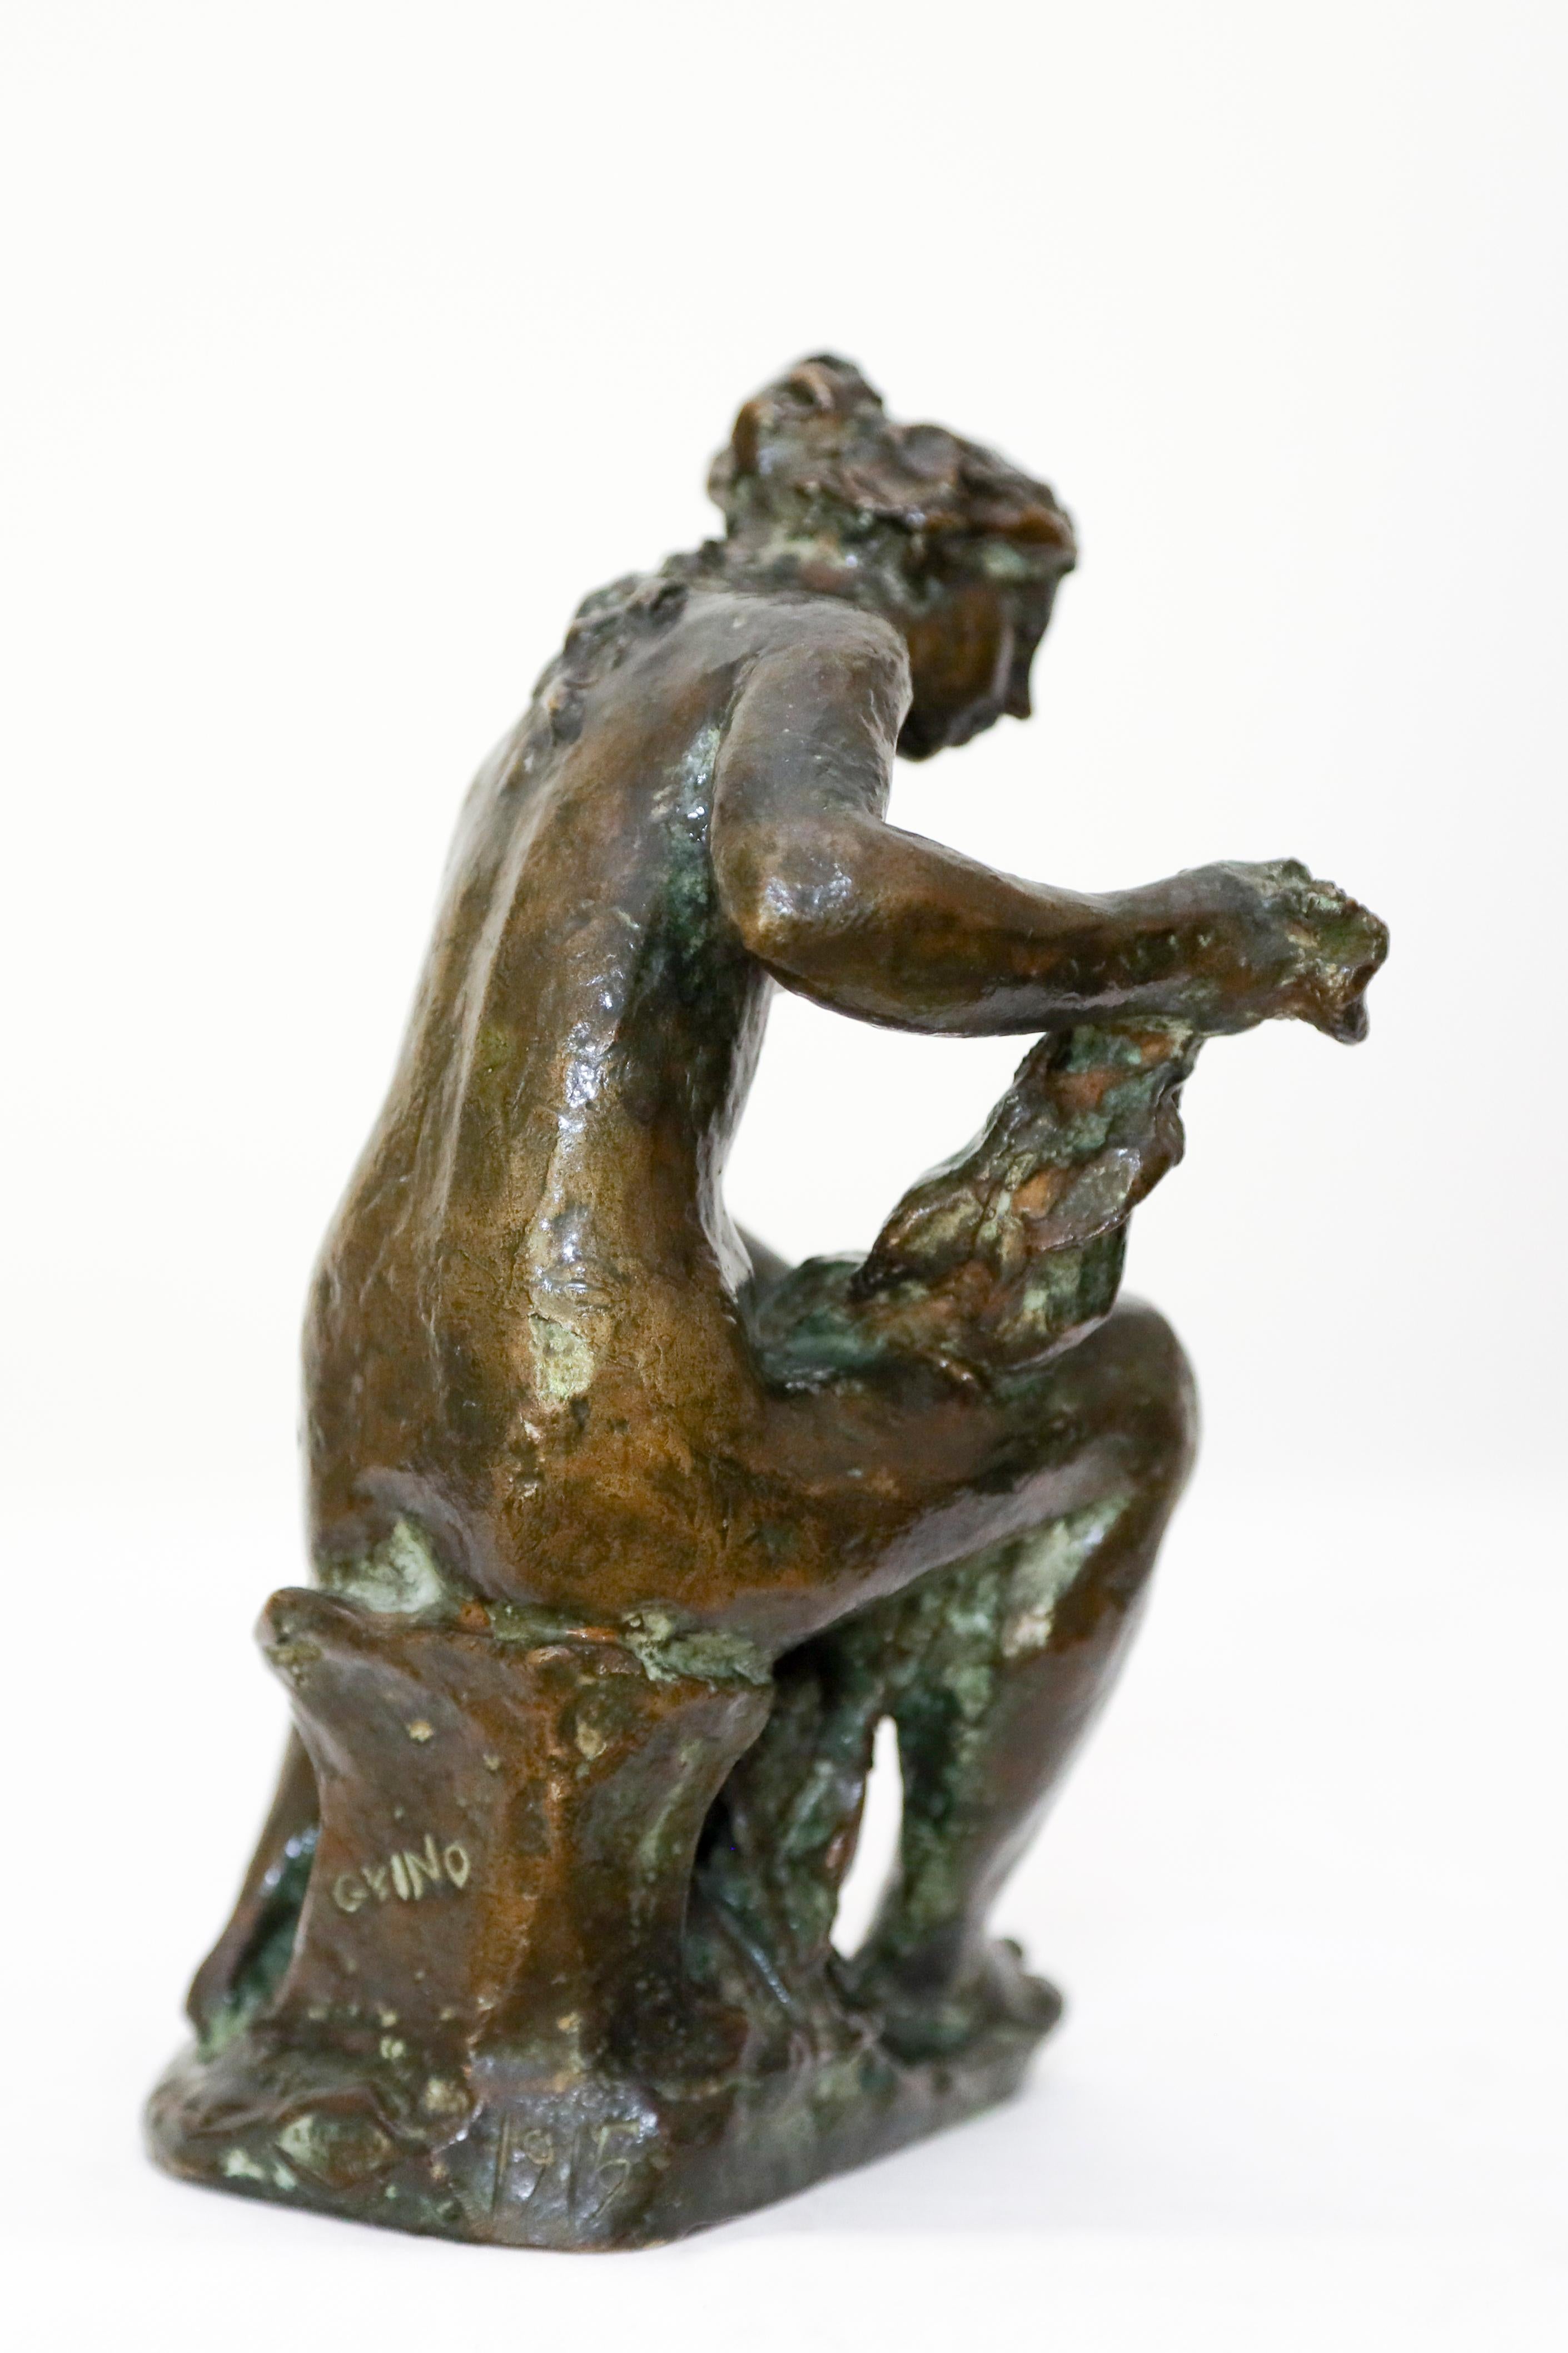 Seated Woman Bronze, Femme Assise a la Toiletter or Petite Baigneuse Assise - French School Sculpture by Richard Guino